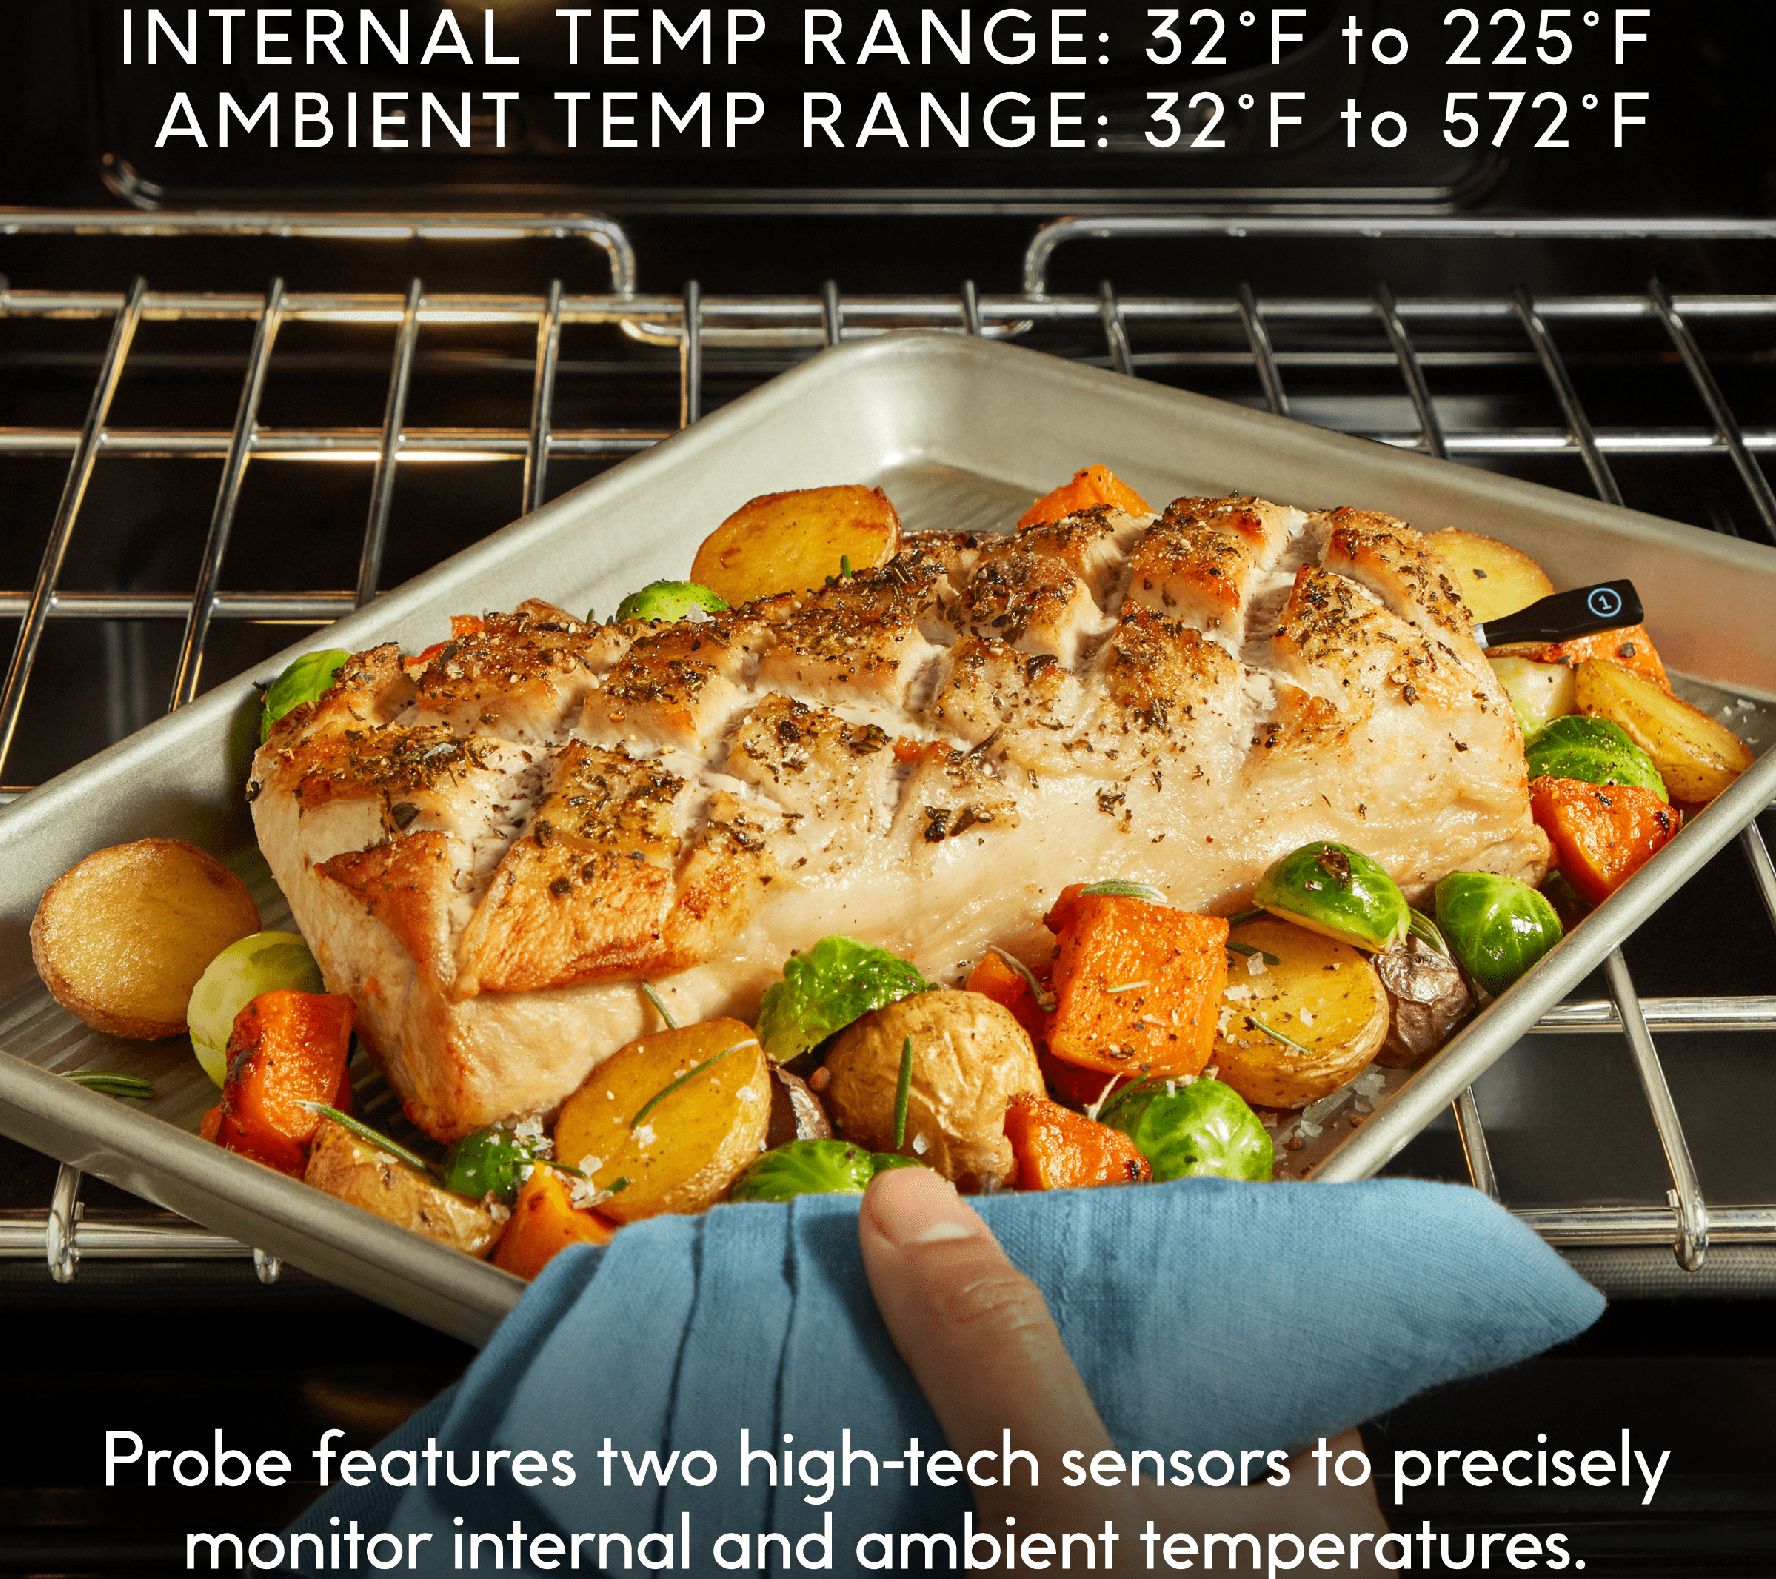 CHEF iQ Smart Thermometer Extra Probe No. 2, Bluetooth/WiFi Enabled, Must  Be Used with Smart Hub 